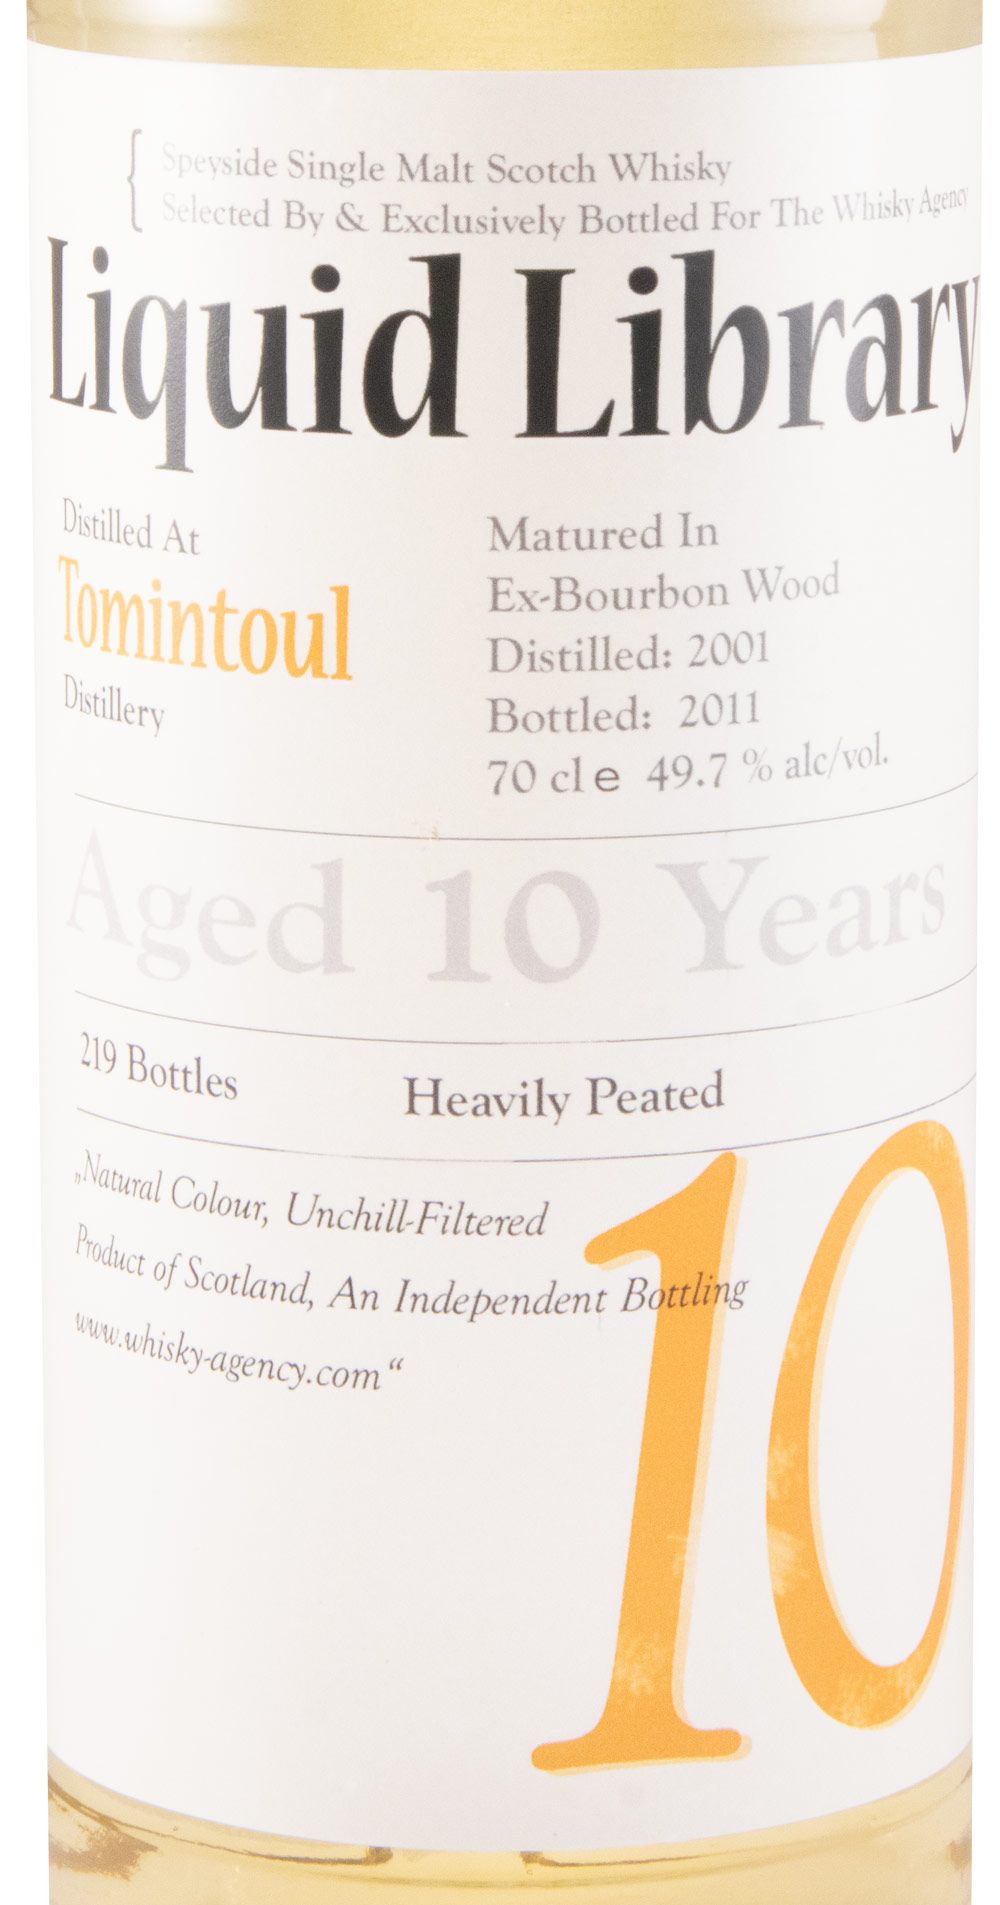 2001 Tomintoul Liquid Library Heavily Peated 10 years (bottle in 2011)